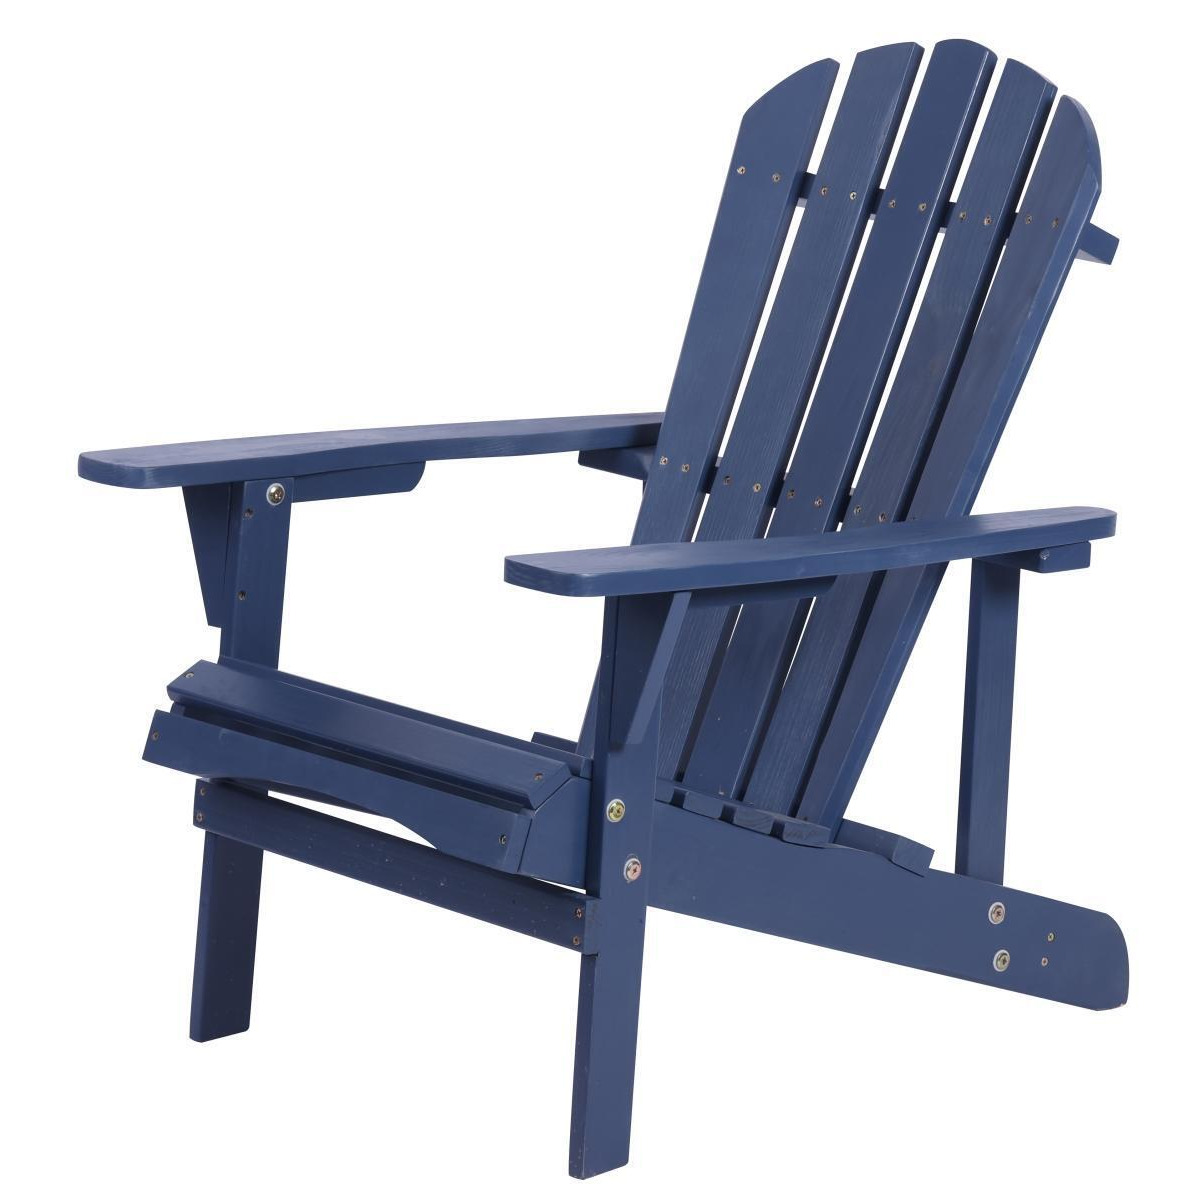 JUL HOME SW2006NV Solid Wood Adirondack Chair